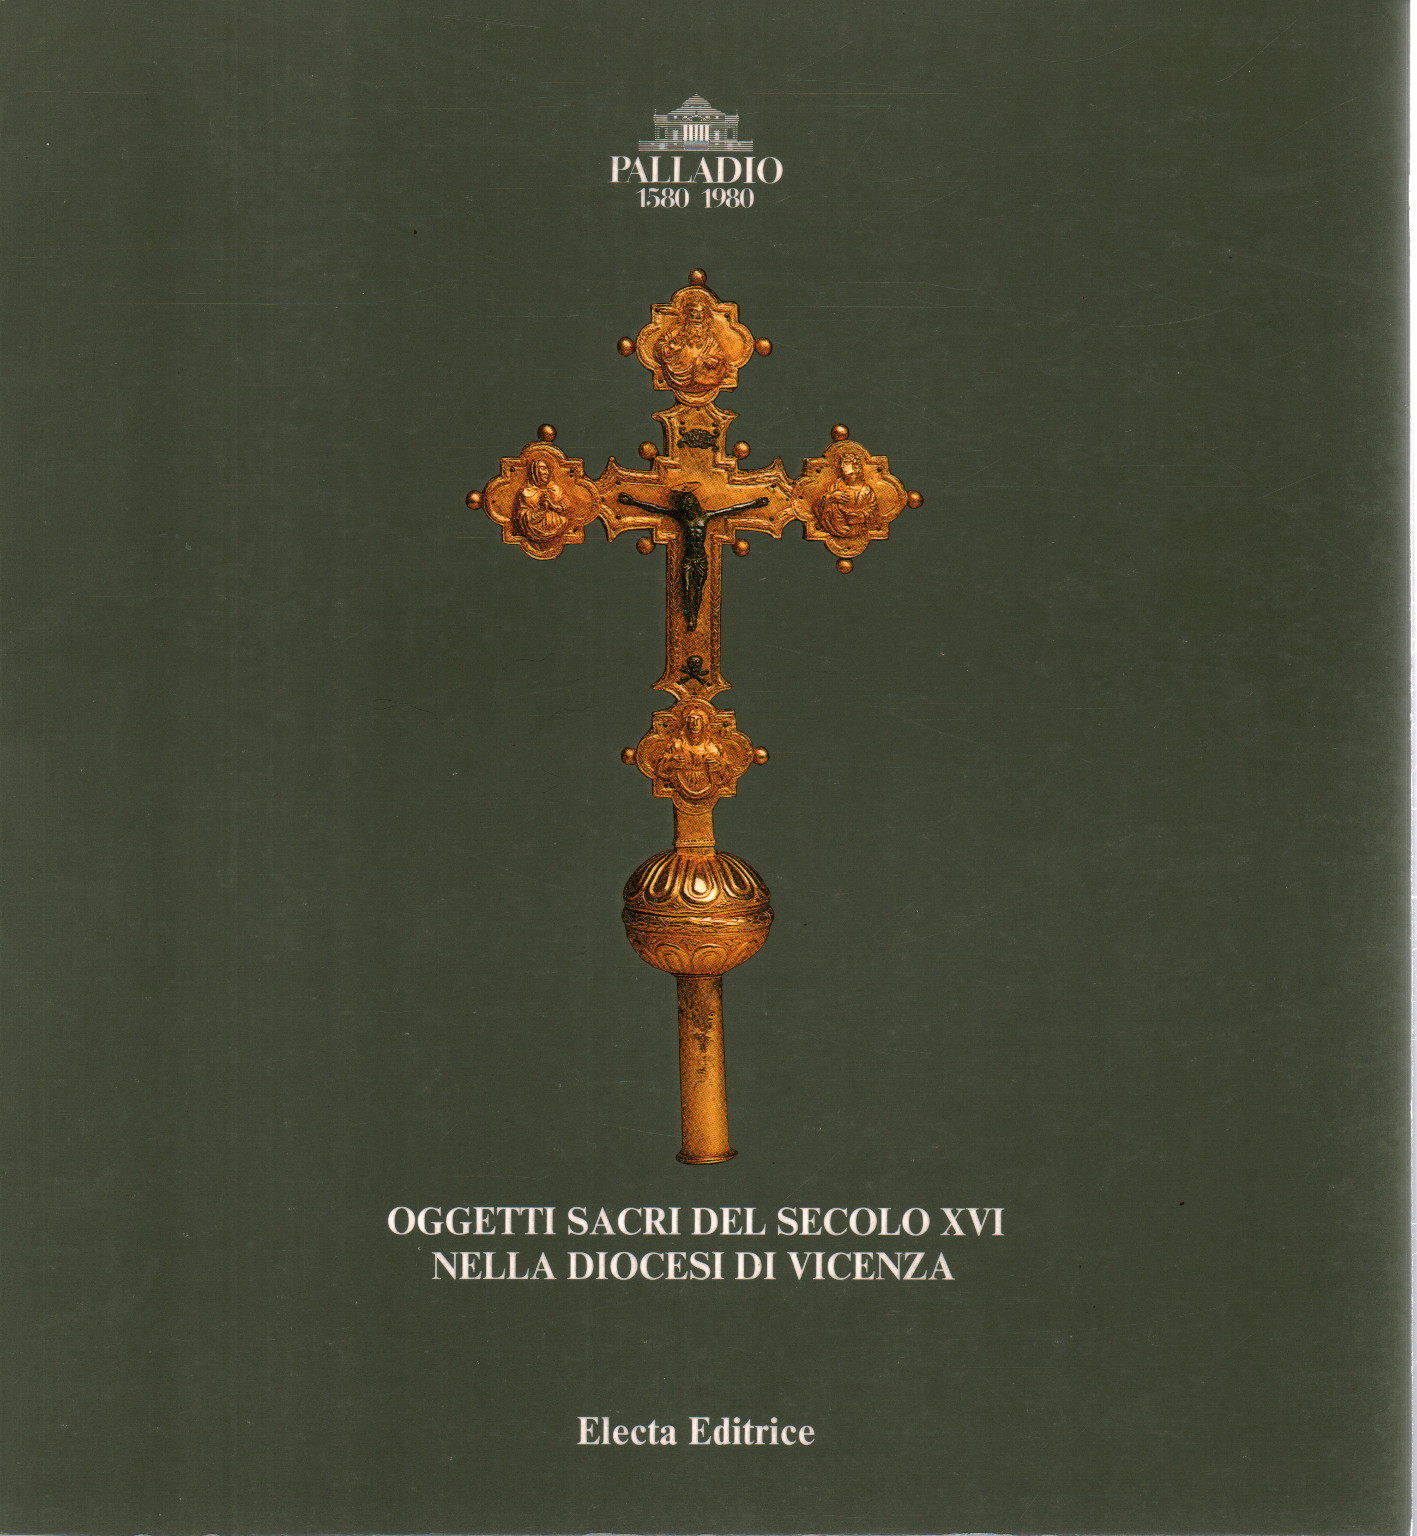 Sacred objects of the XVI century in the diocese of Vice, s.a.